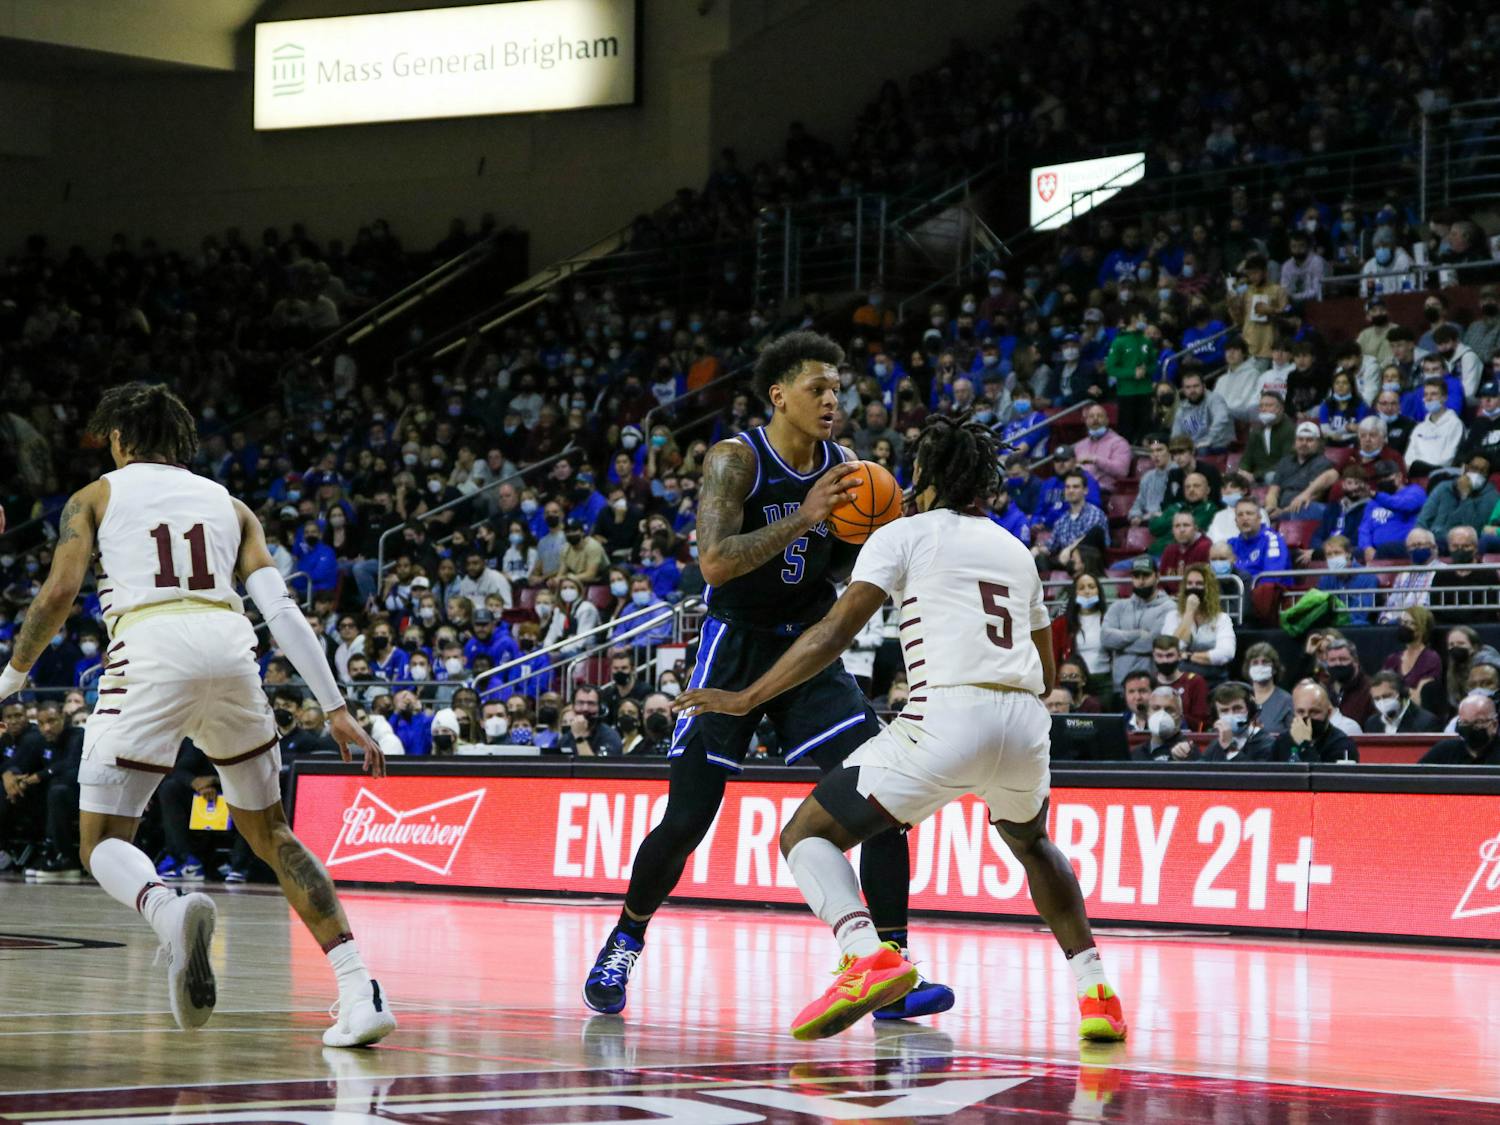 The Blue Devils took down the Boston College Eagles, 72-61, improving to 21-4.